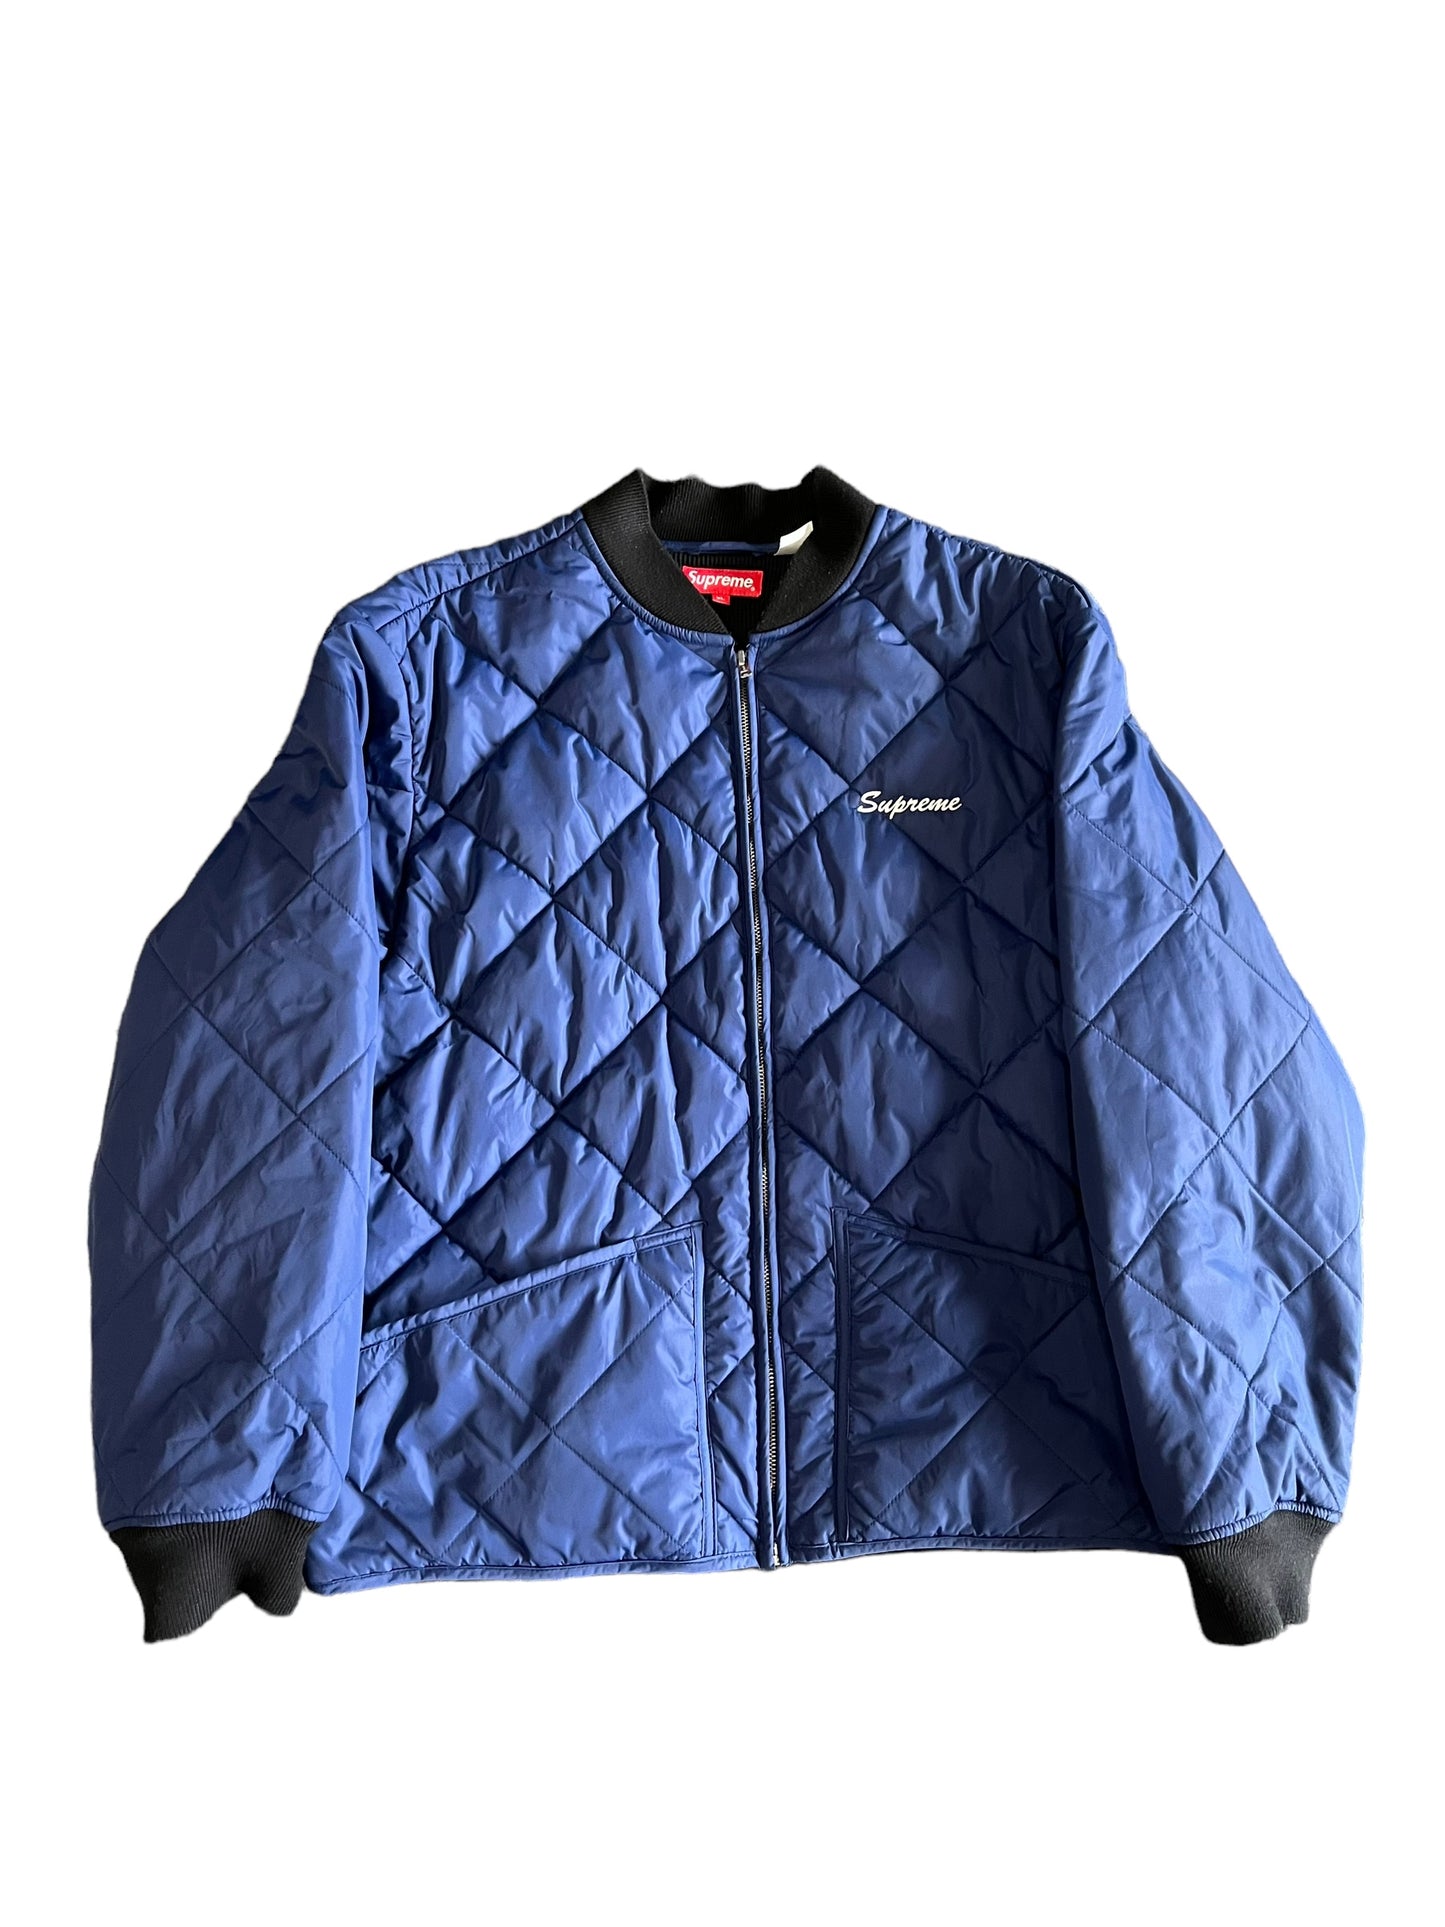 Supreme Quit Your Job Quilted Work Jacket Size XL